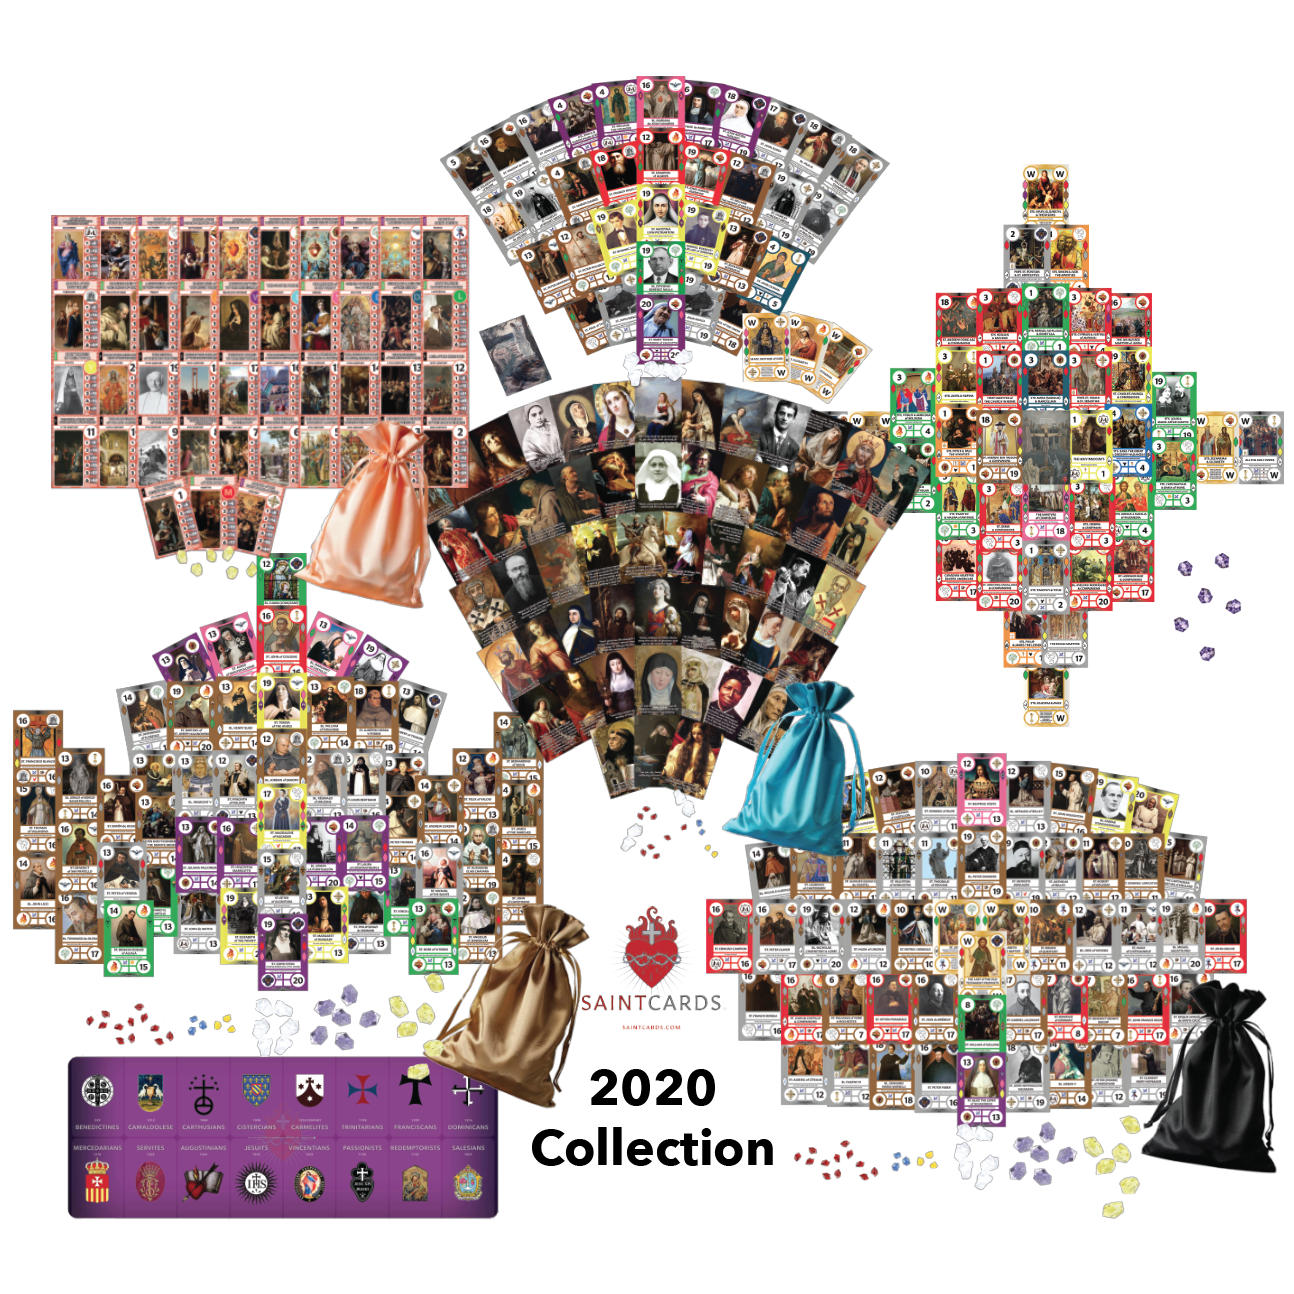 All of the 2020 Collection!